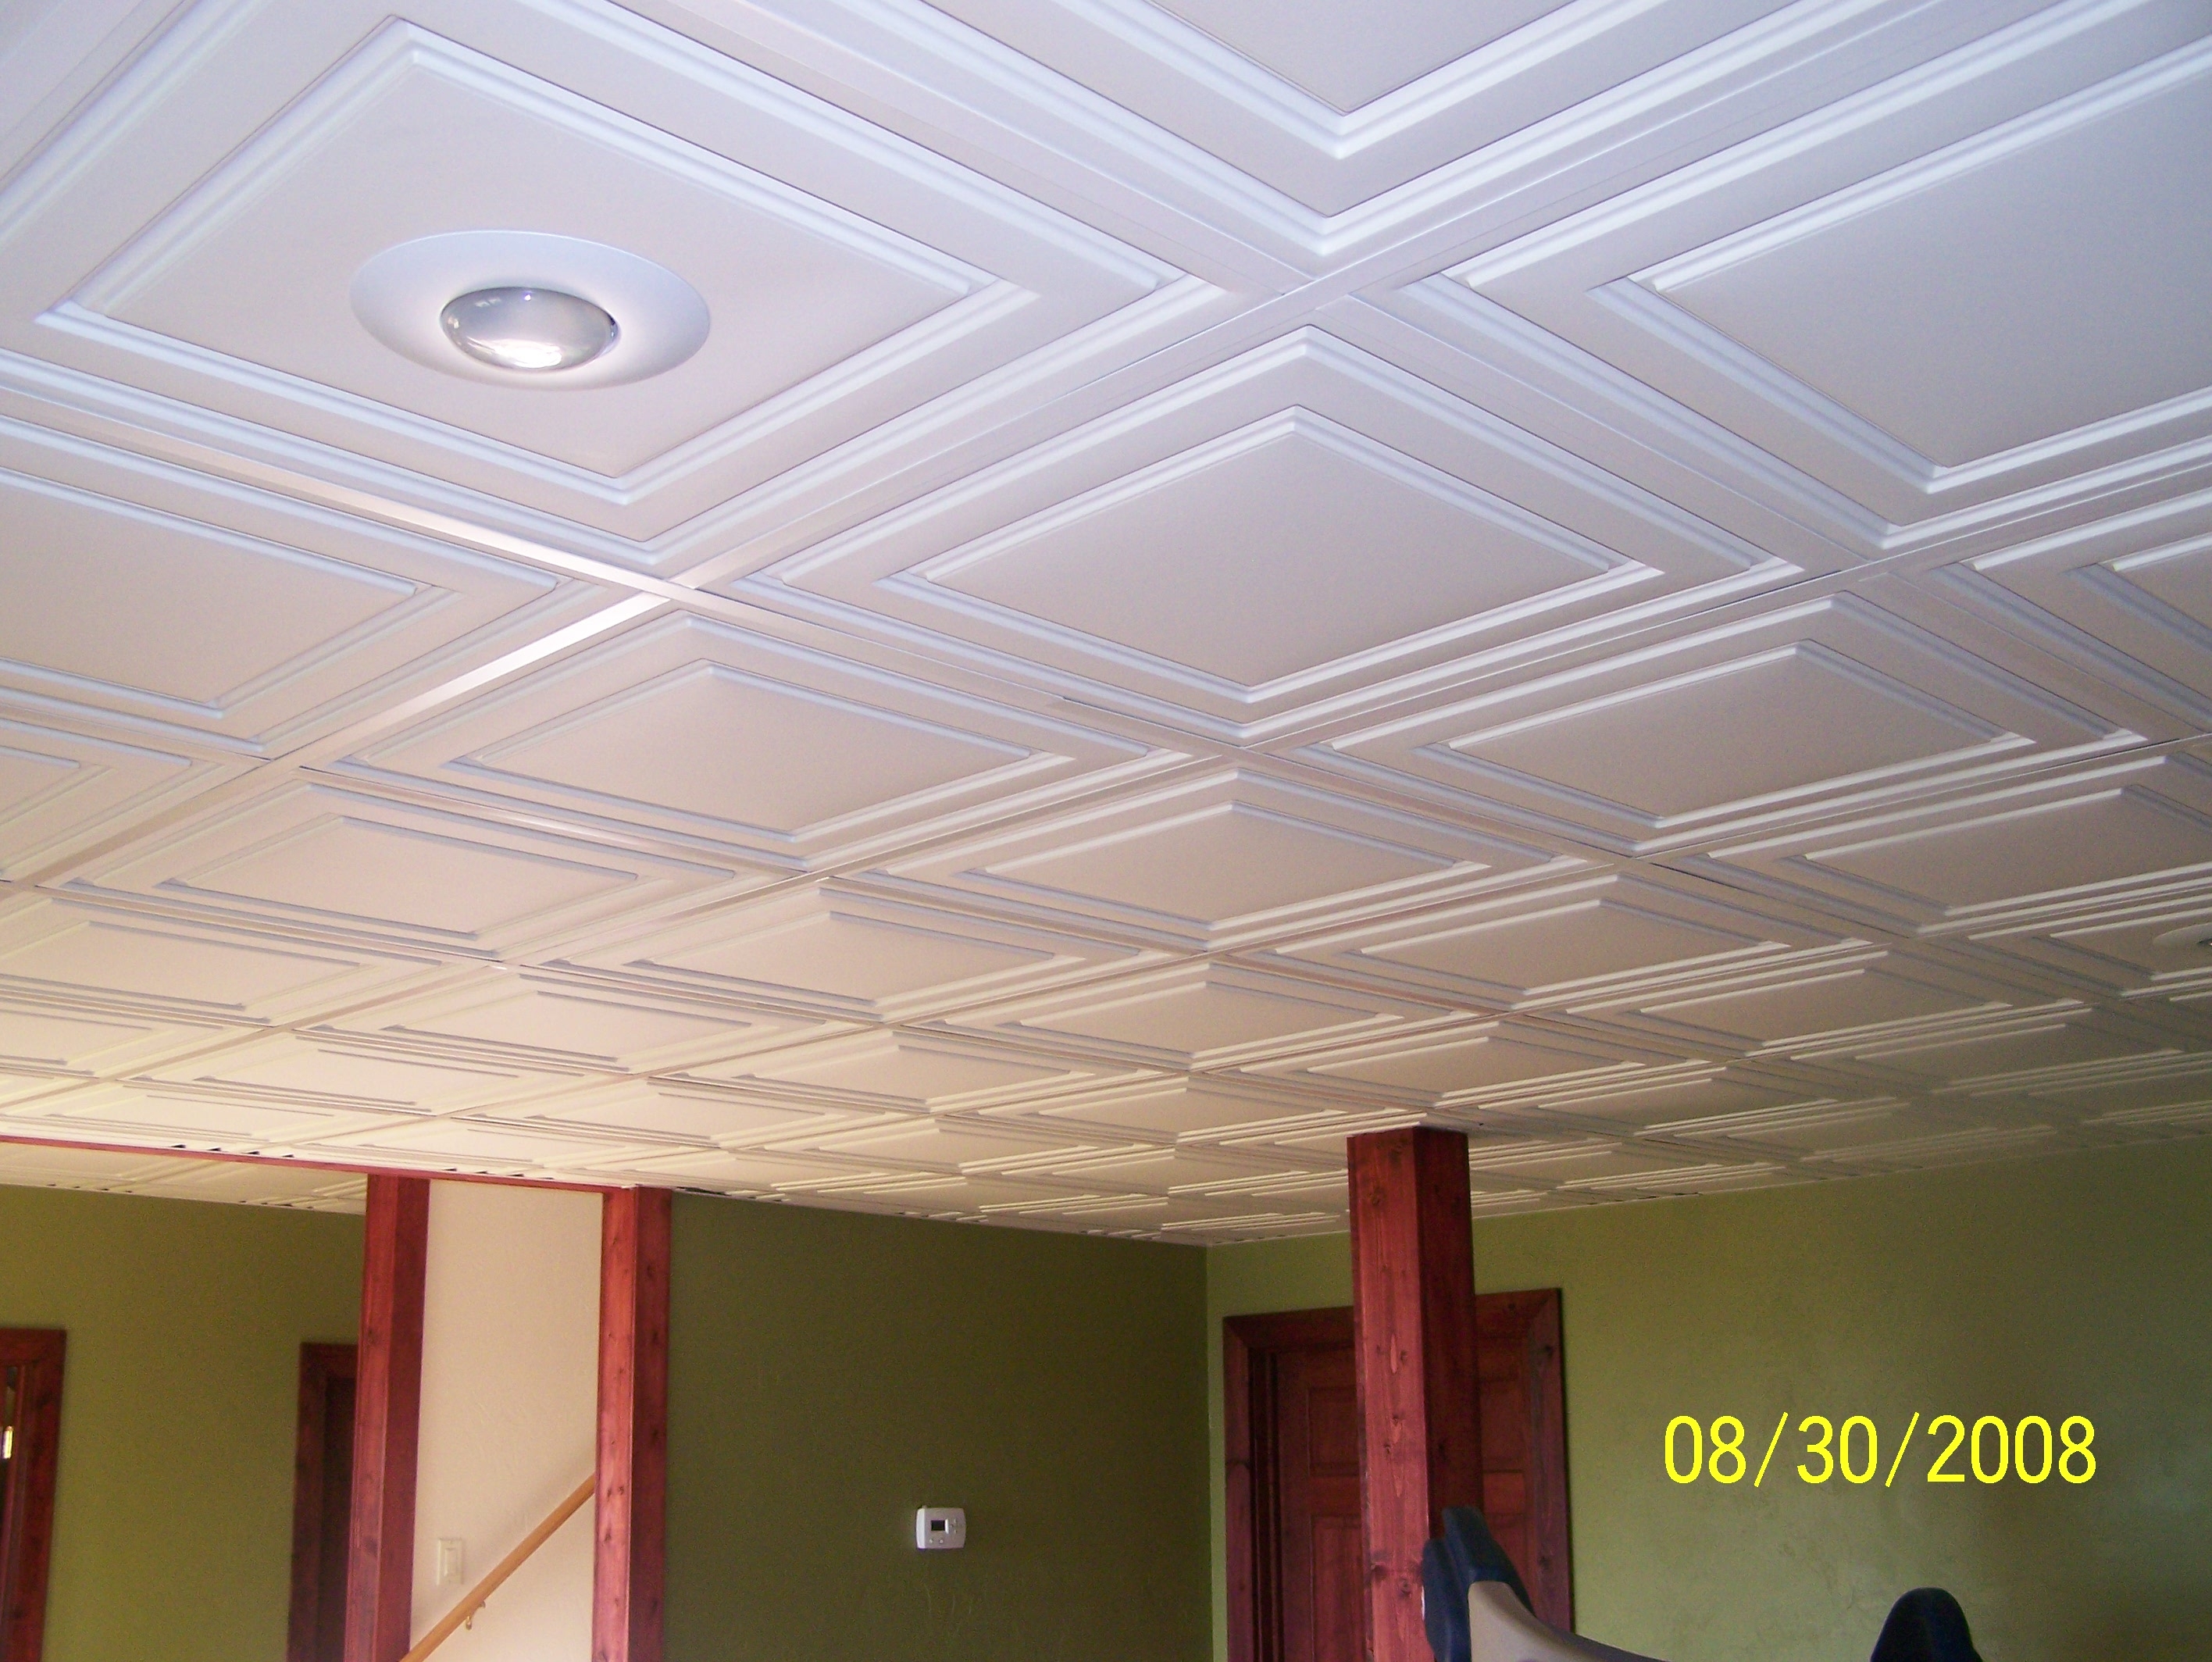 Pvc Ceiling Tiles For Bathrooms Pvc Ceiling Tiles For Bathrooms pvc ceiling tiles canada the pvc ceiling and art details for 2832 X 2128